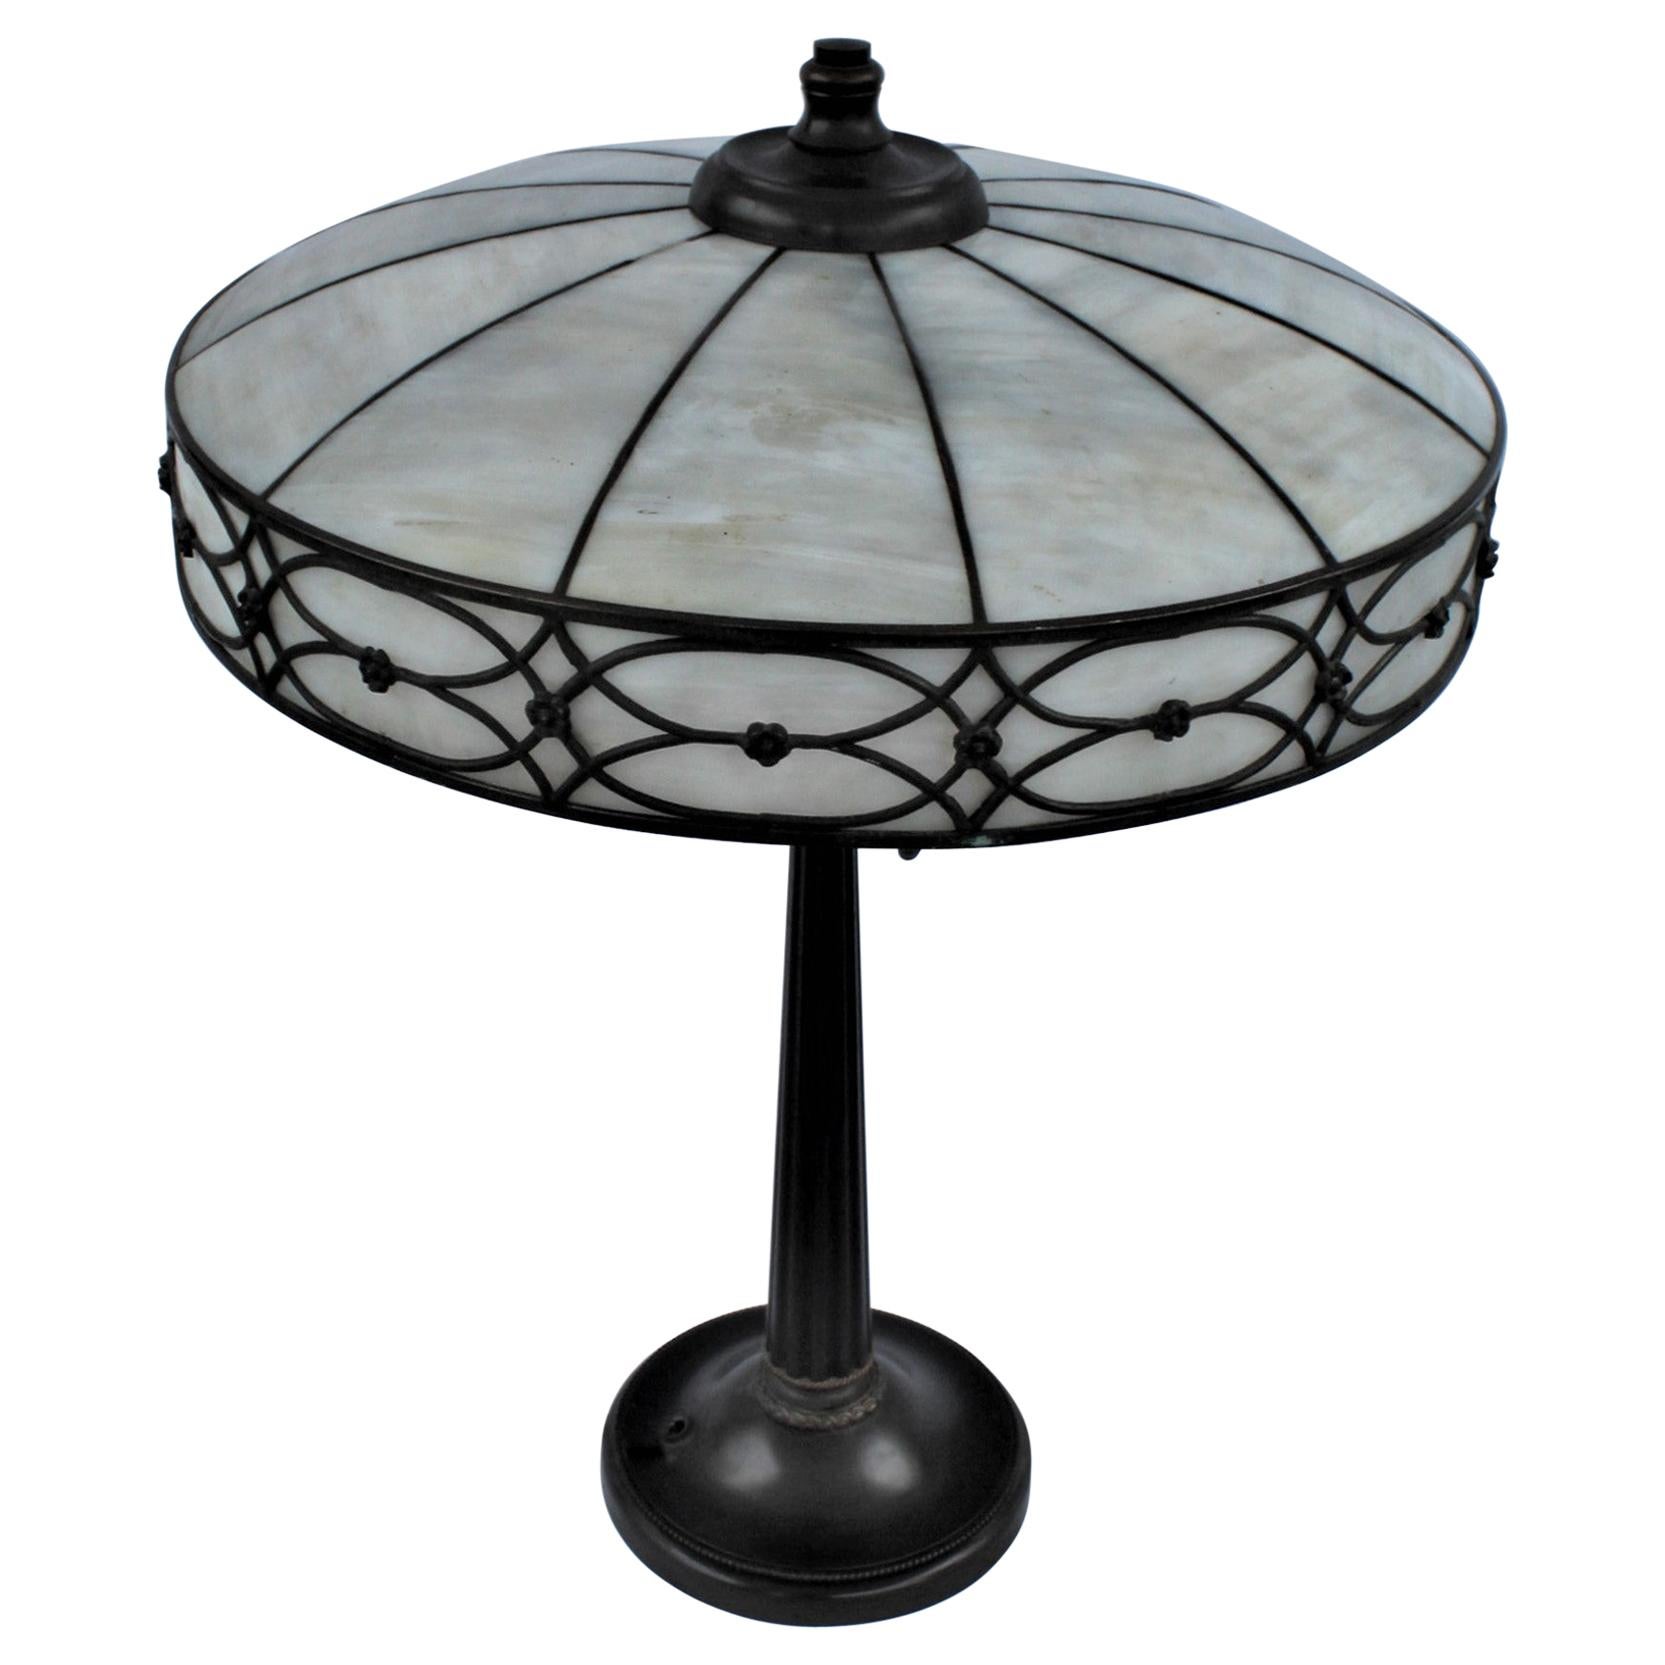 Original Table Lamp, Lead Glass Shade, Base with Acorn Pulls